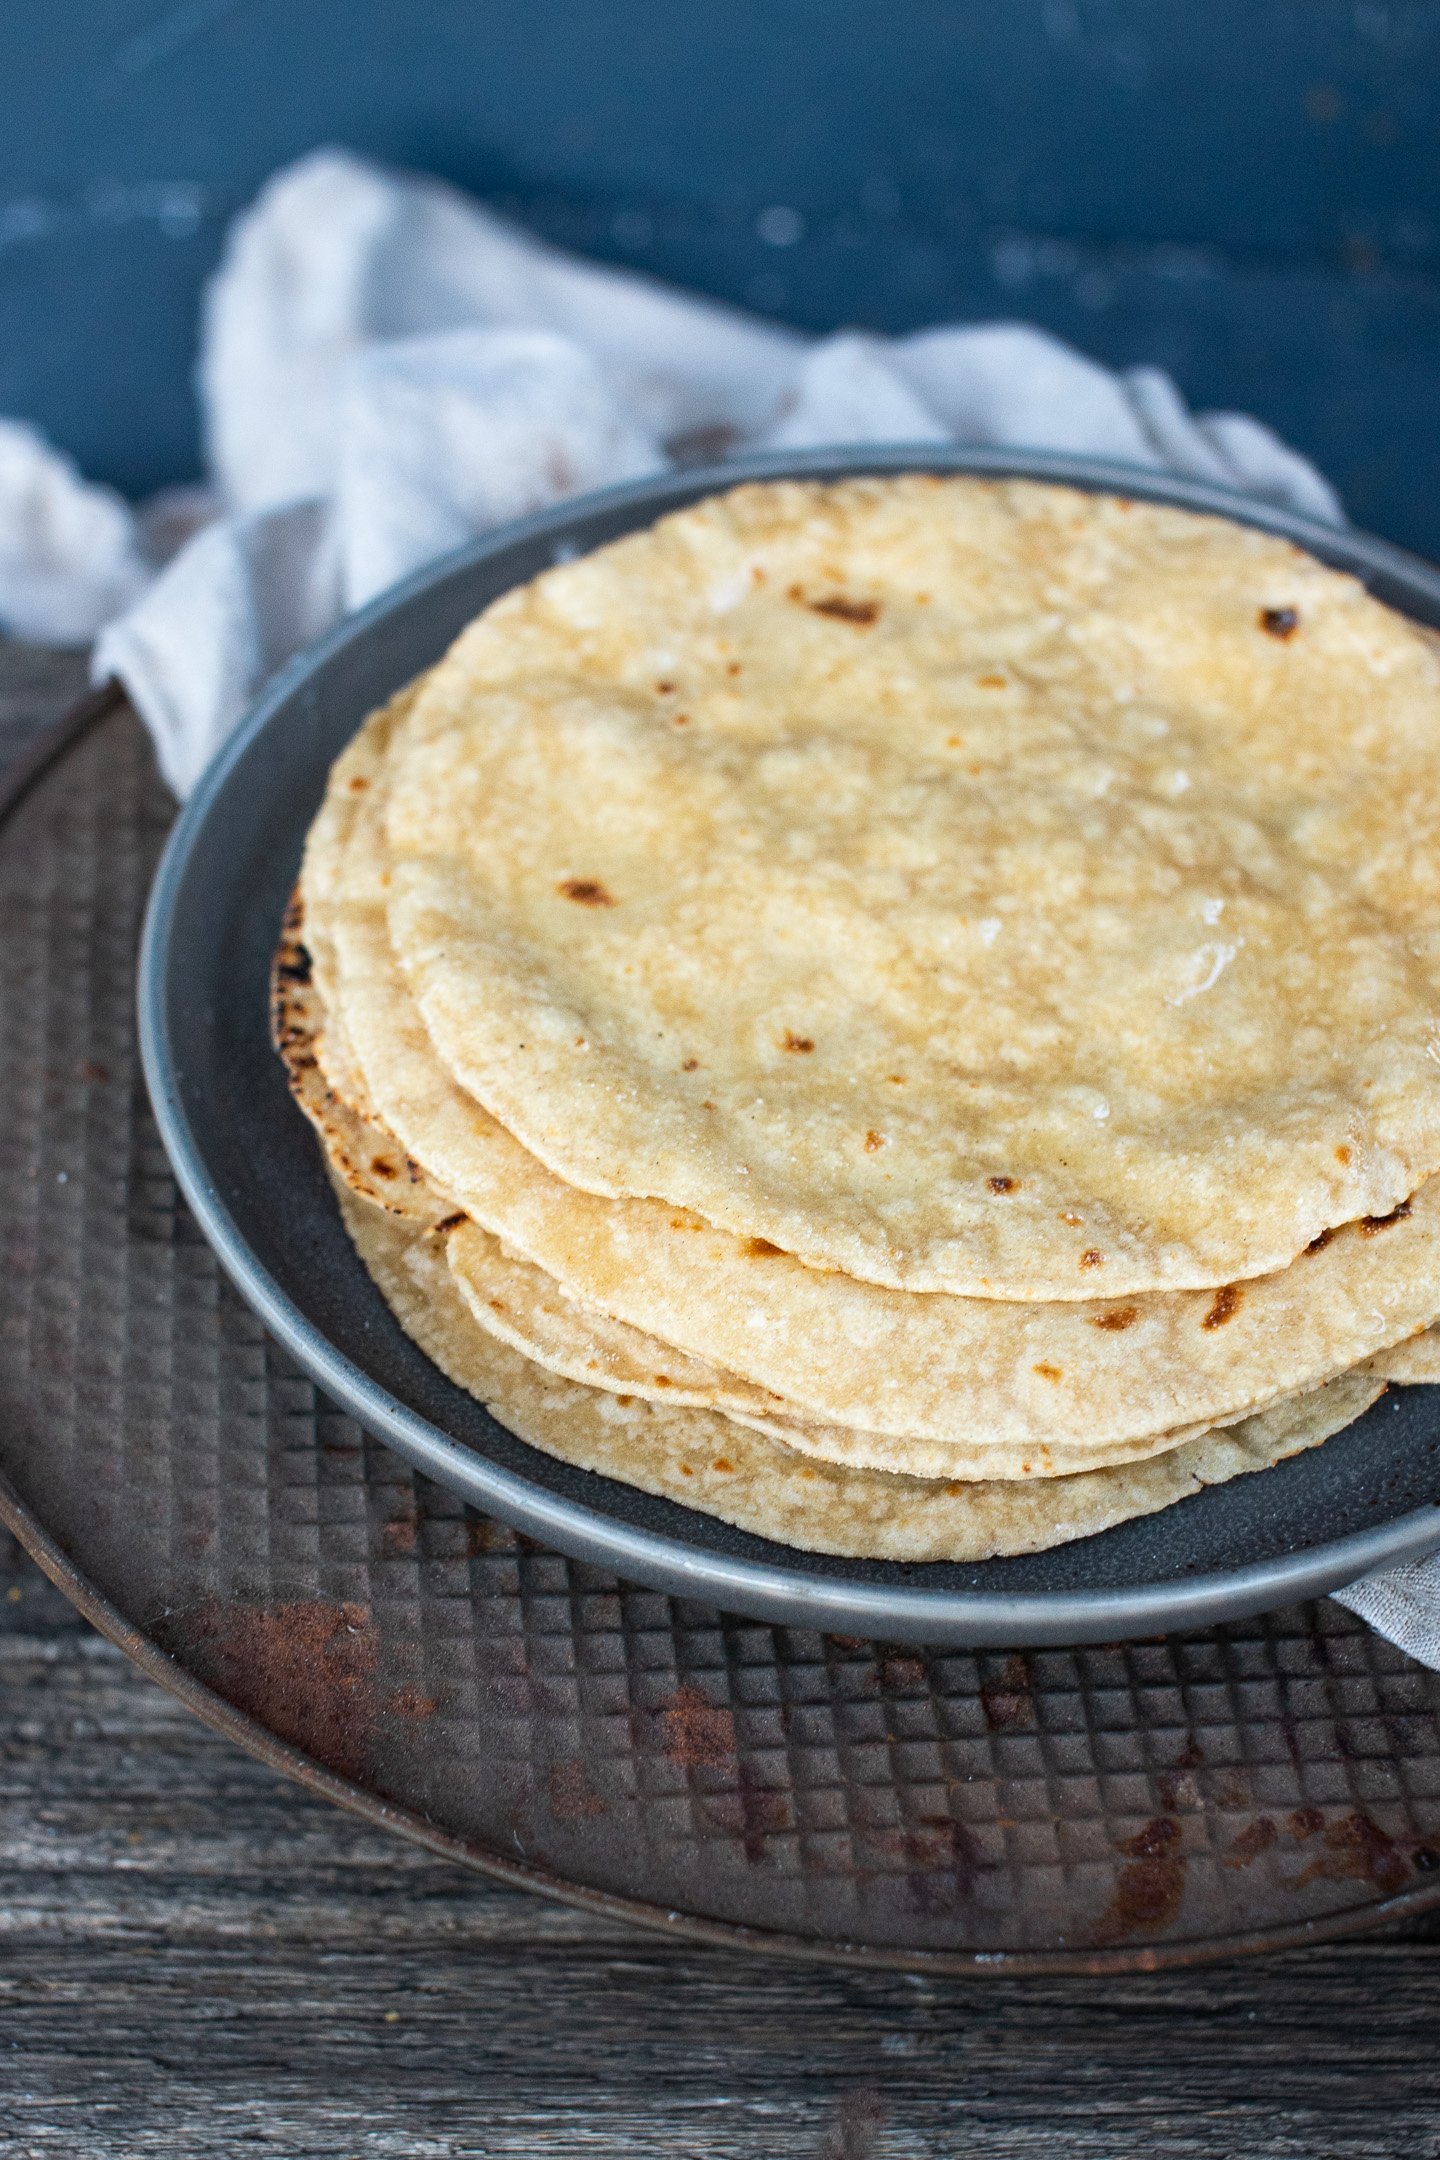 A stack of roti